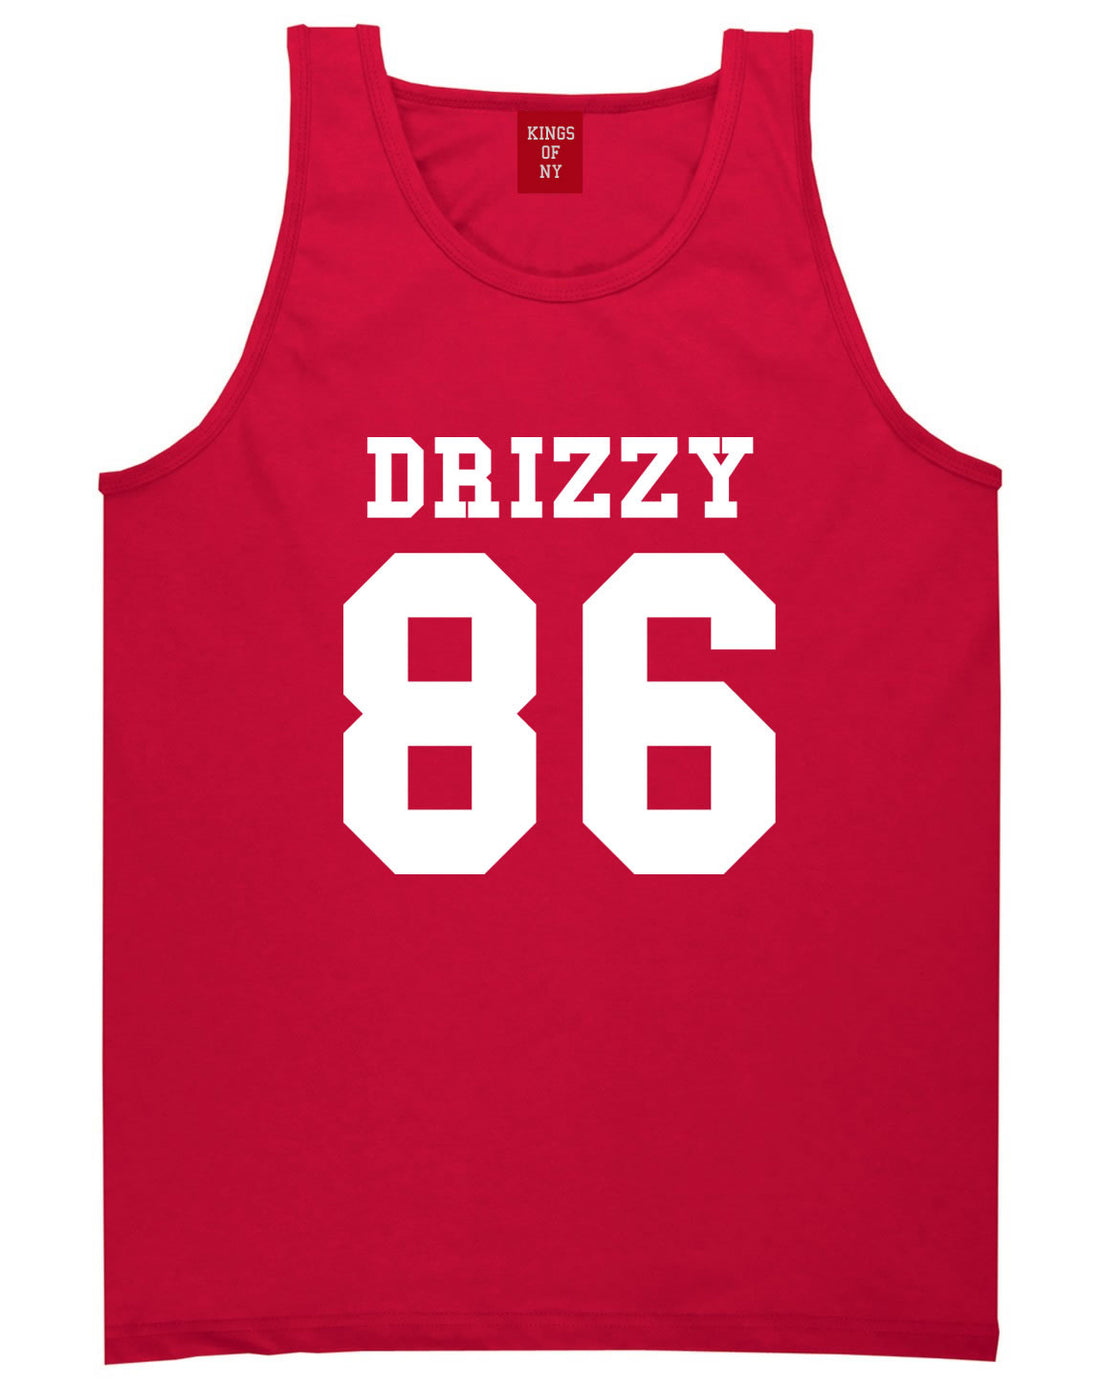 Drizzy 86 Team Jersey Tank Top in Red by Kings Of NY